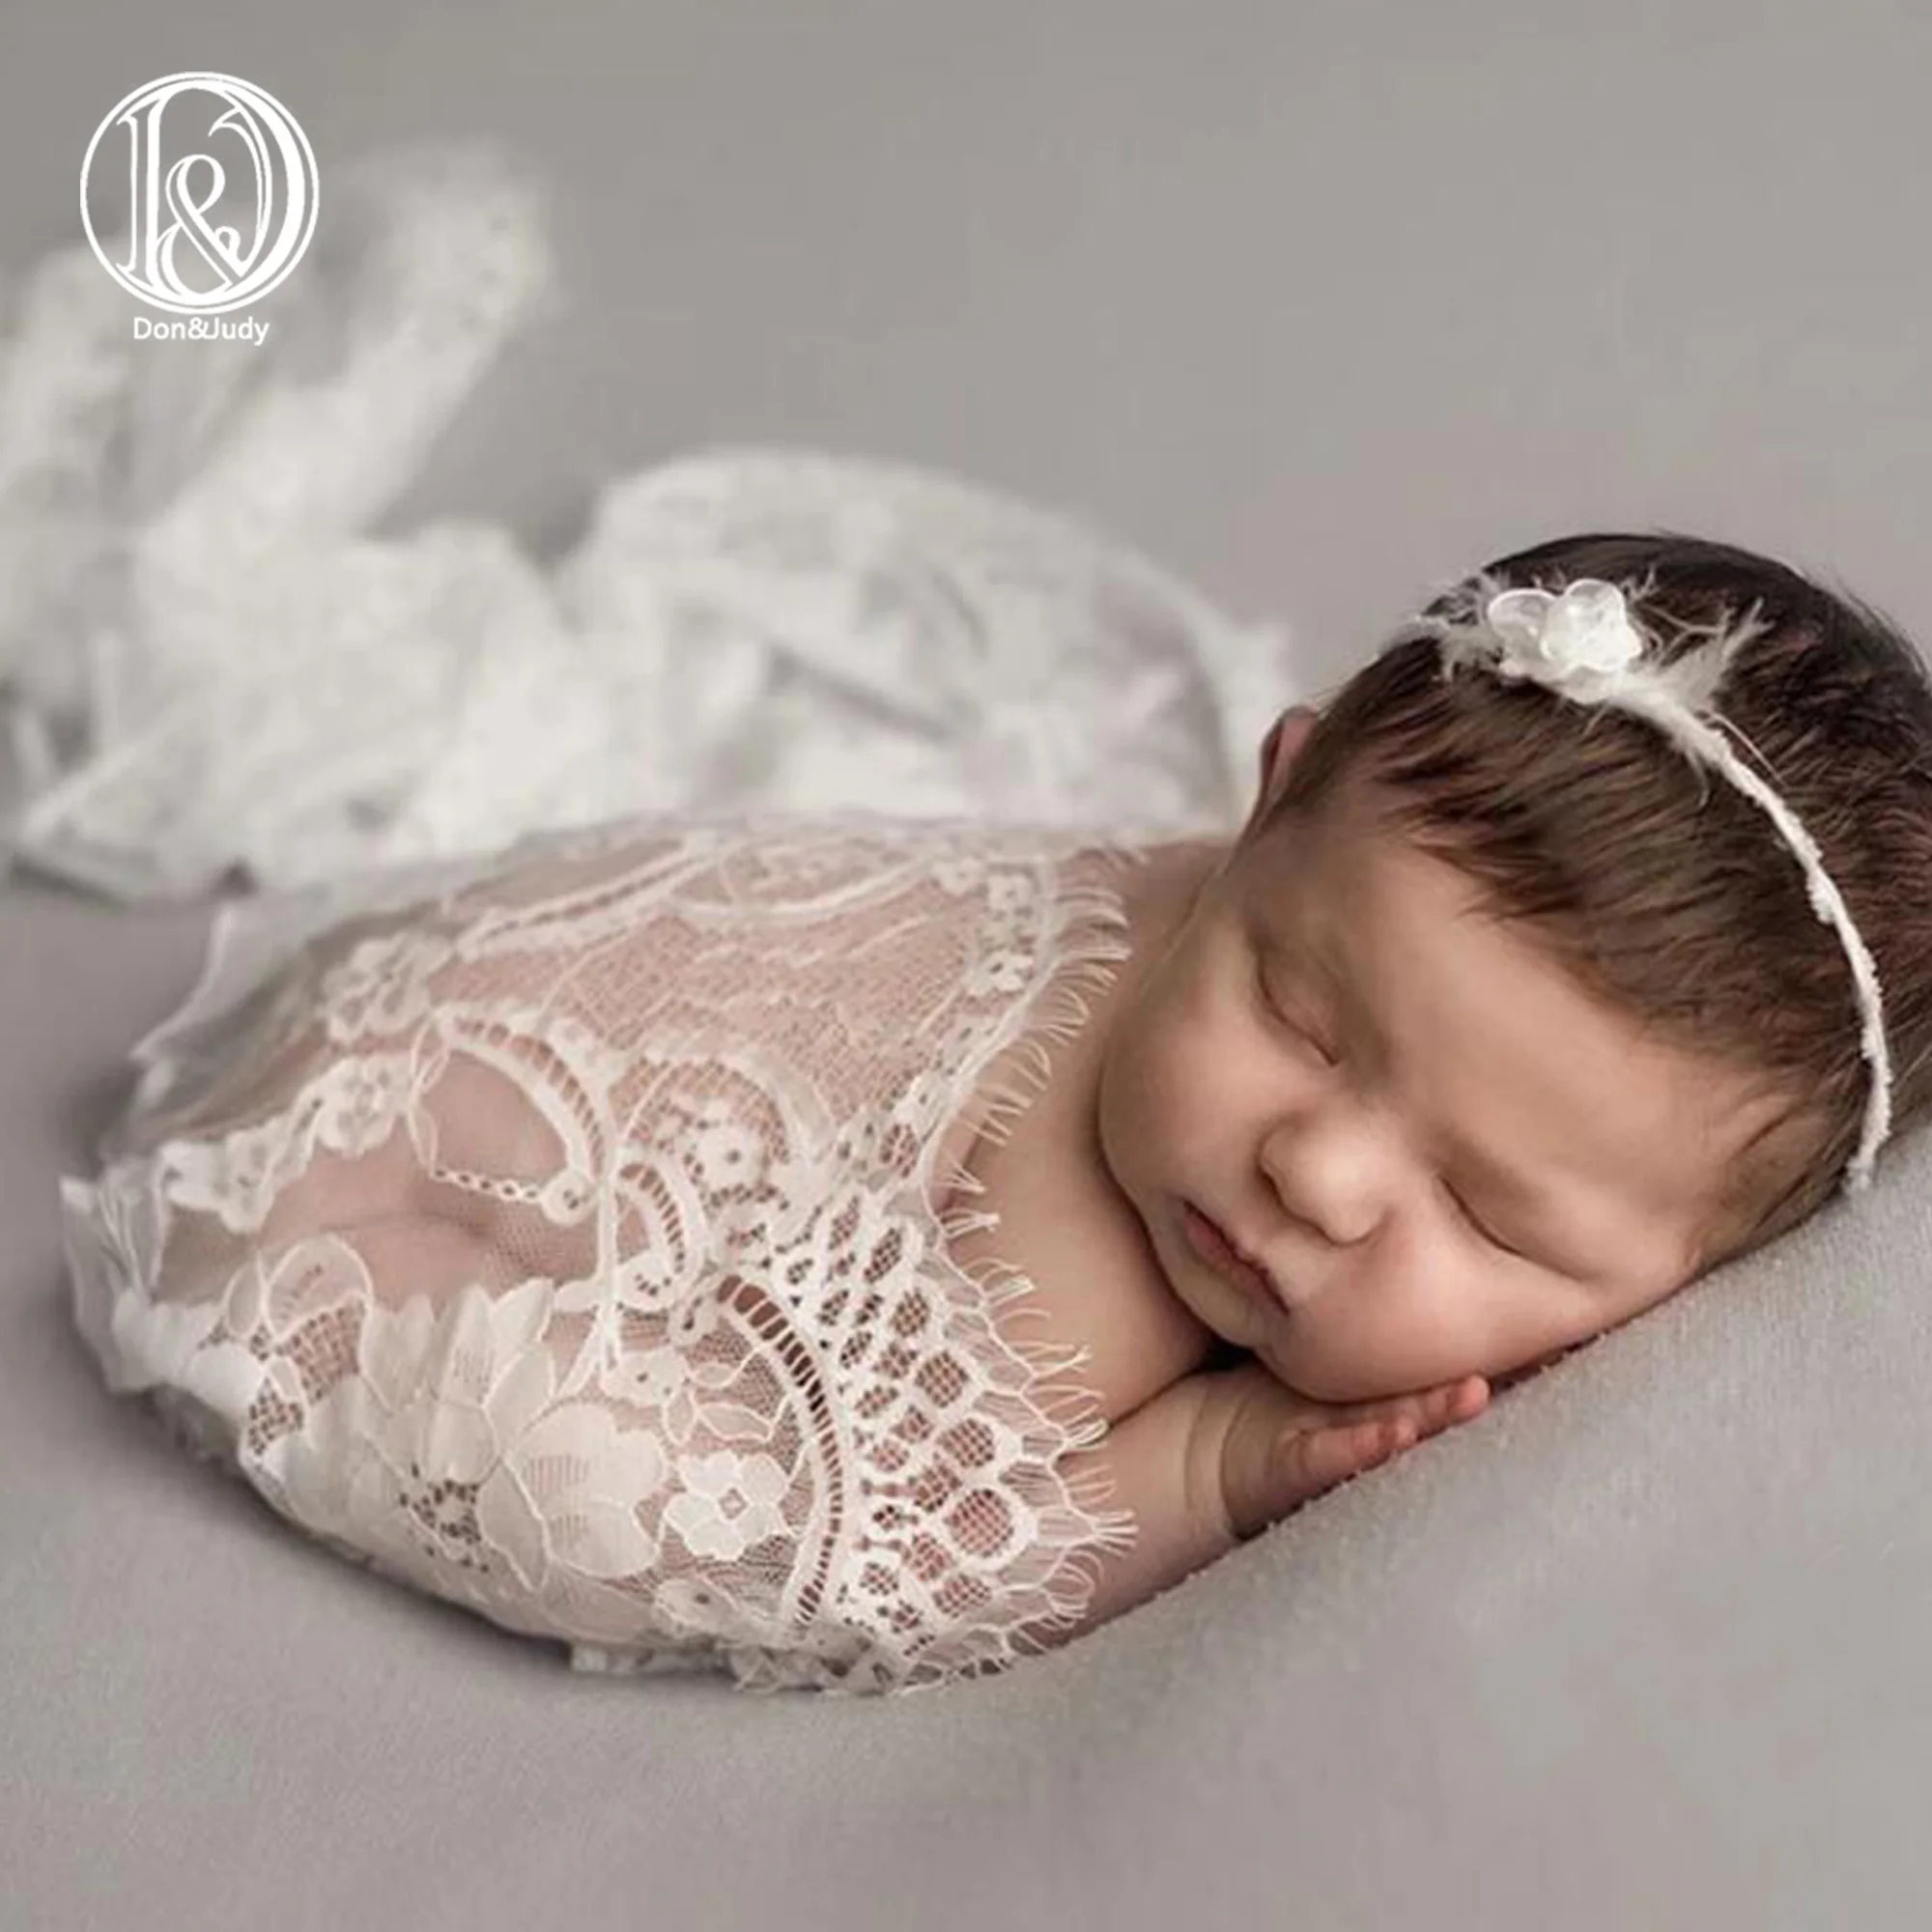 Don&Judy New Summer Kids Wraps Newborn Photography Props Size 300X20cm Handmade Lace Scarf Baby Photo Prop Accessories Shoot 2021 new newborn photography props lace pearl bodysuit floral headband for baby photo backless clothing prop accessories